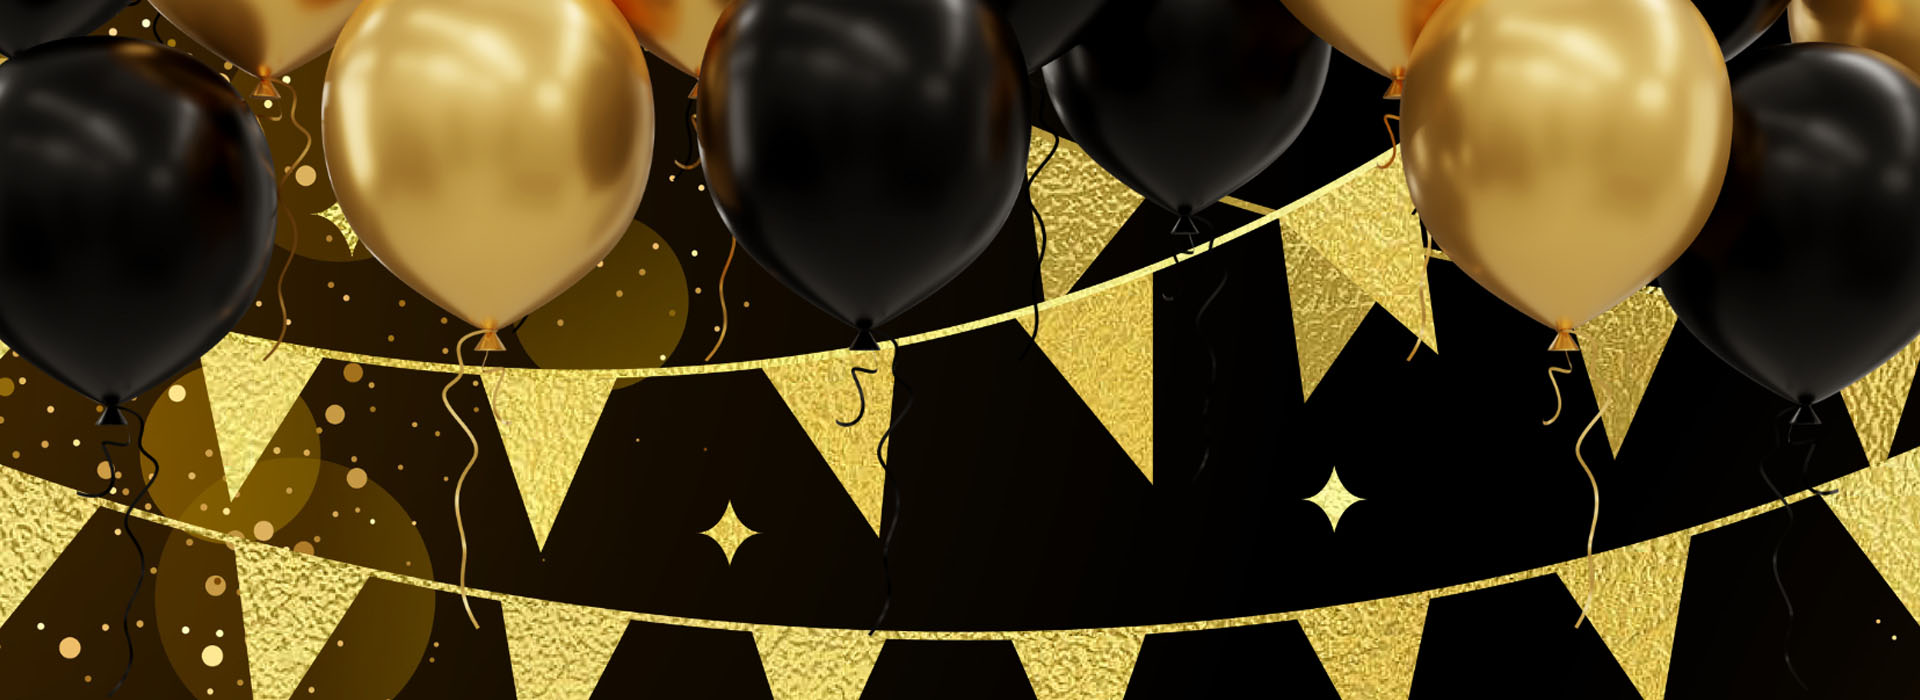 Black and gold balloons